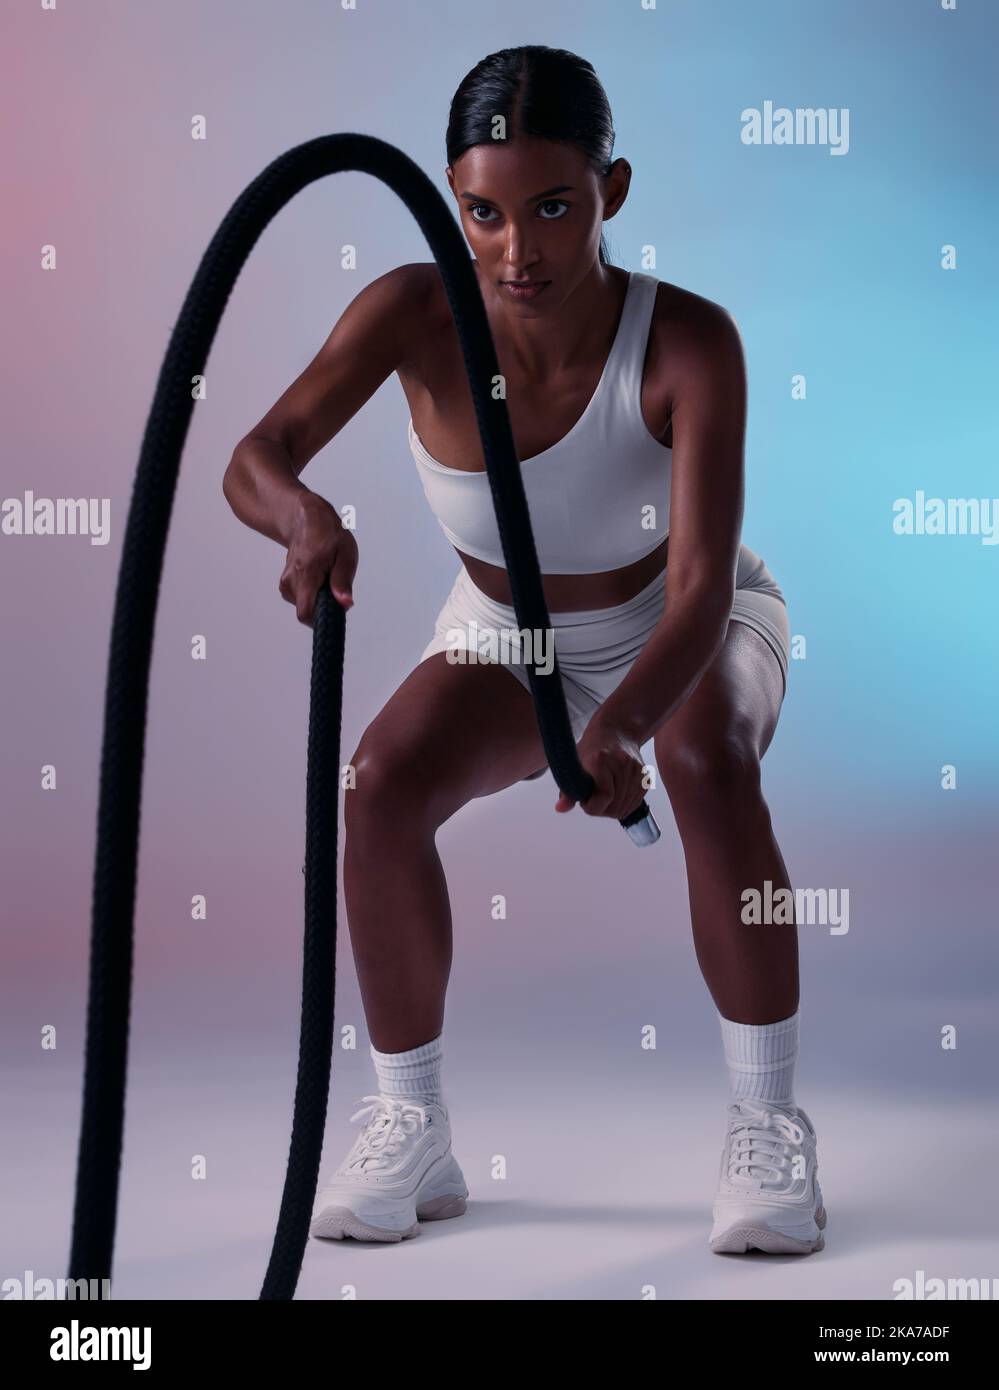 Girl, fitness and rope training exercise for cardio, muscle and endurance practice with color studio background. Focus, health and power of Indian Stock Photo